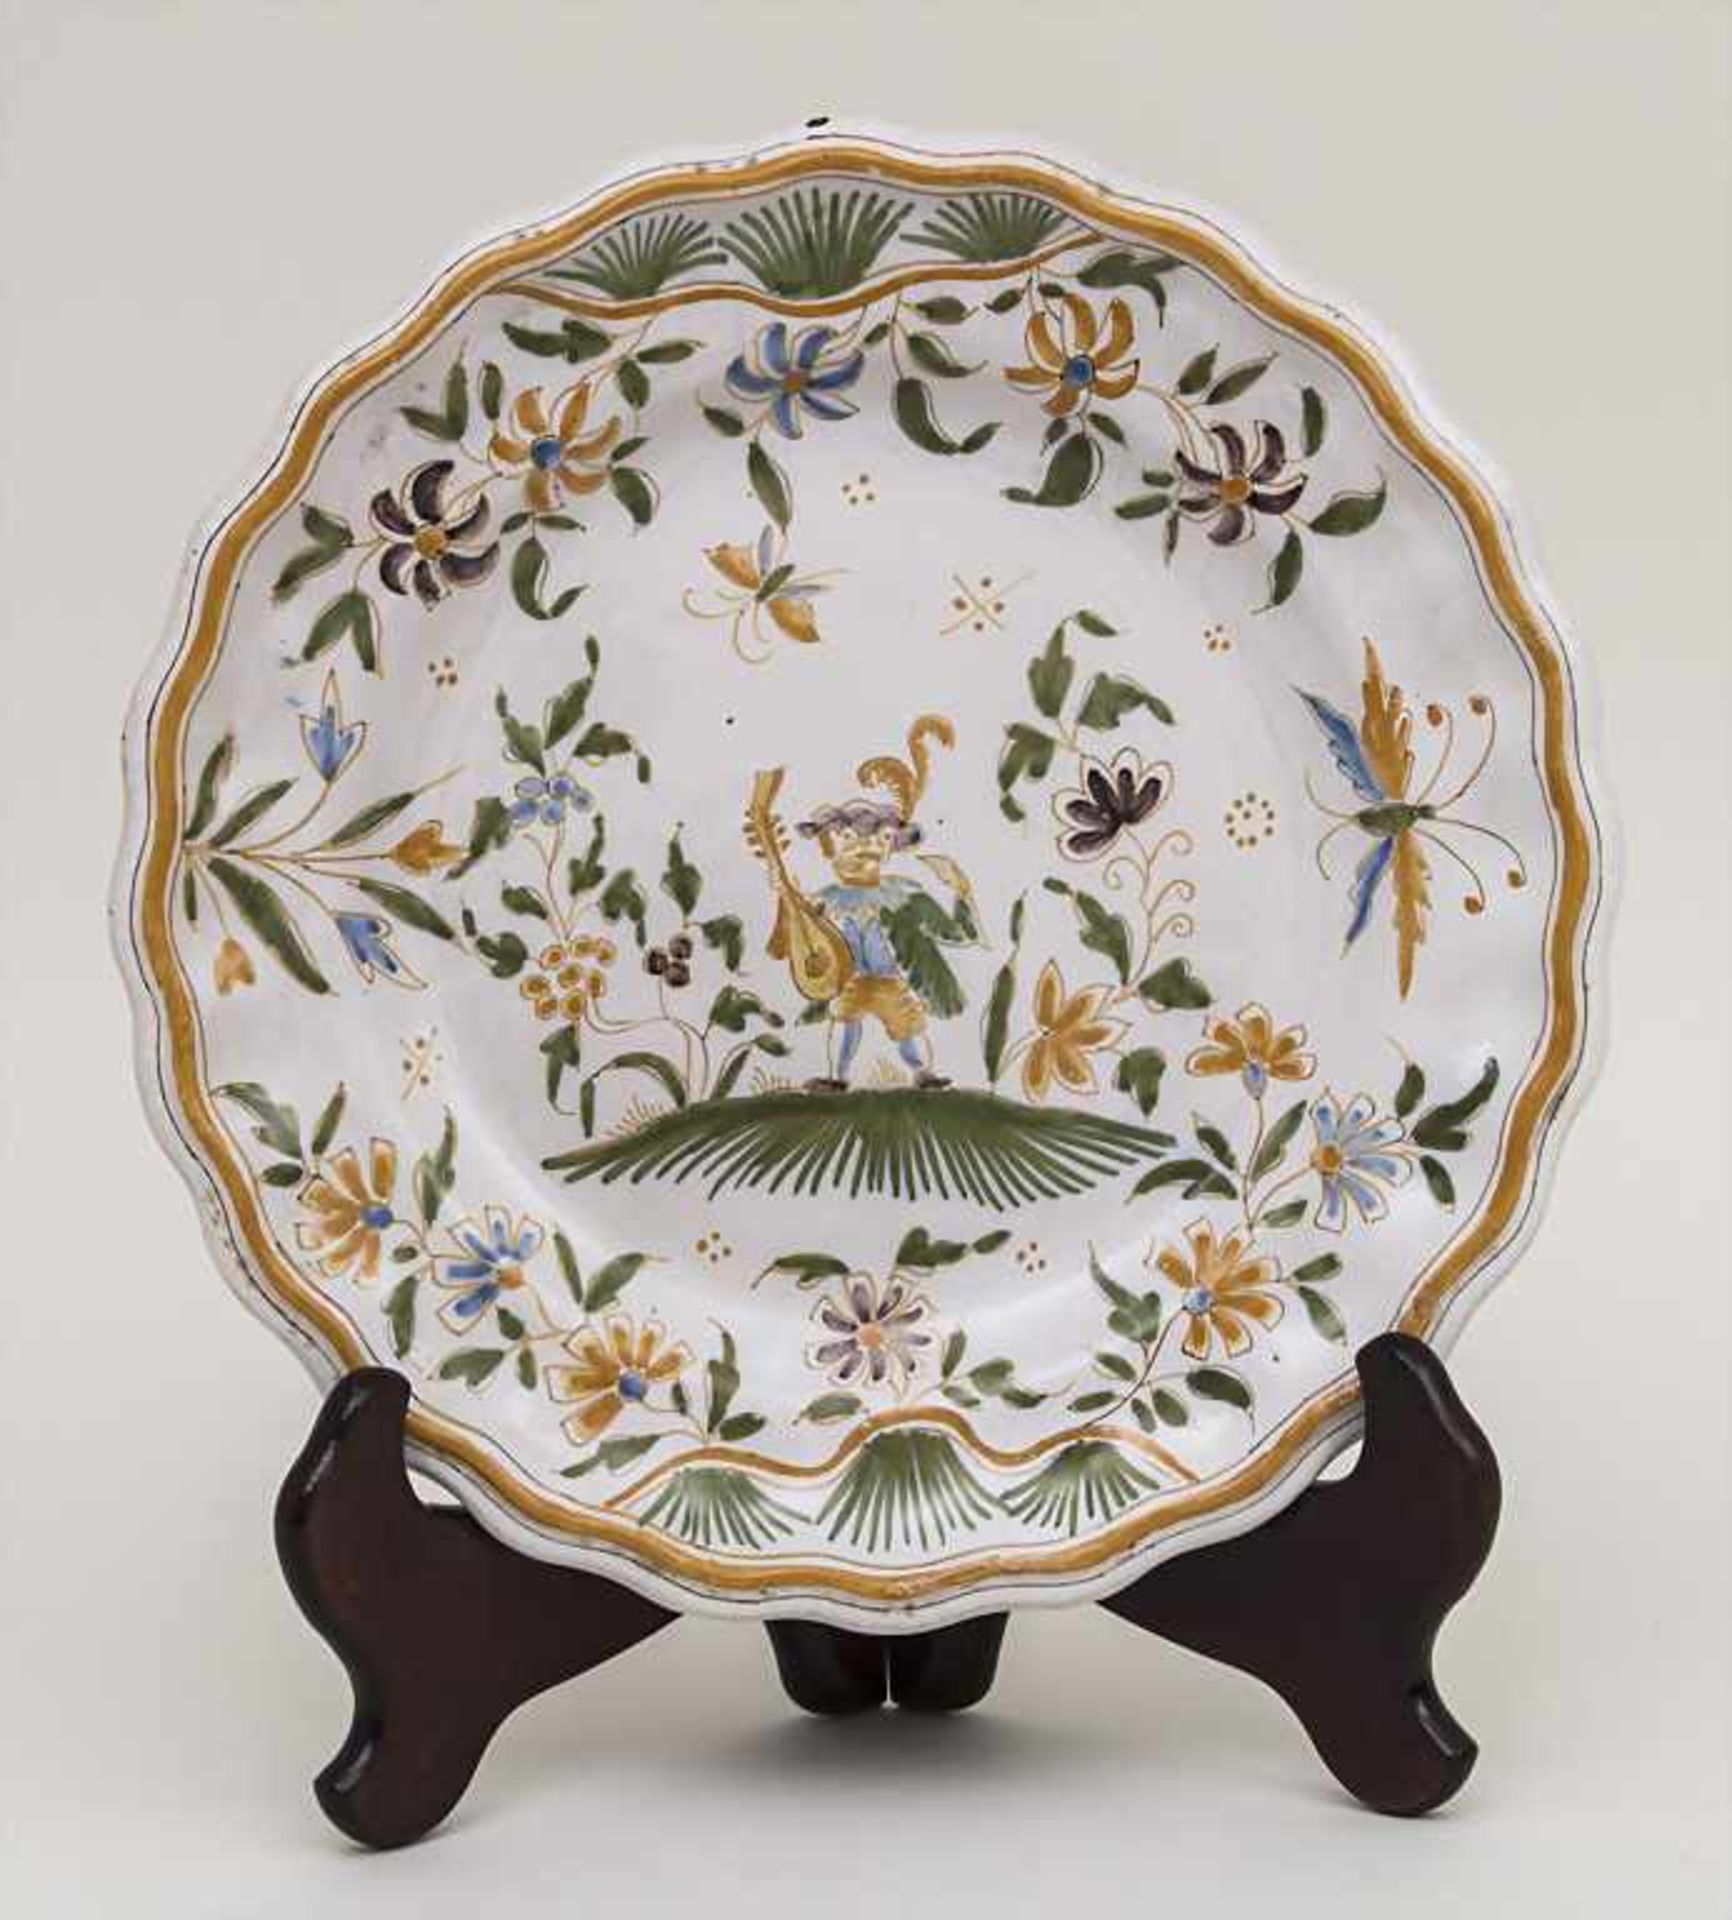 Fayenceteller / A Faience Plate, Moustiers, Frankreich, 18. Jh. Material: Fayence, glasiert und